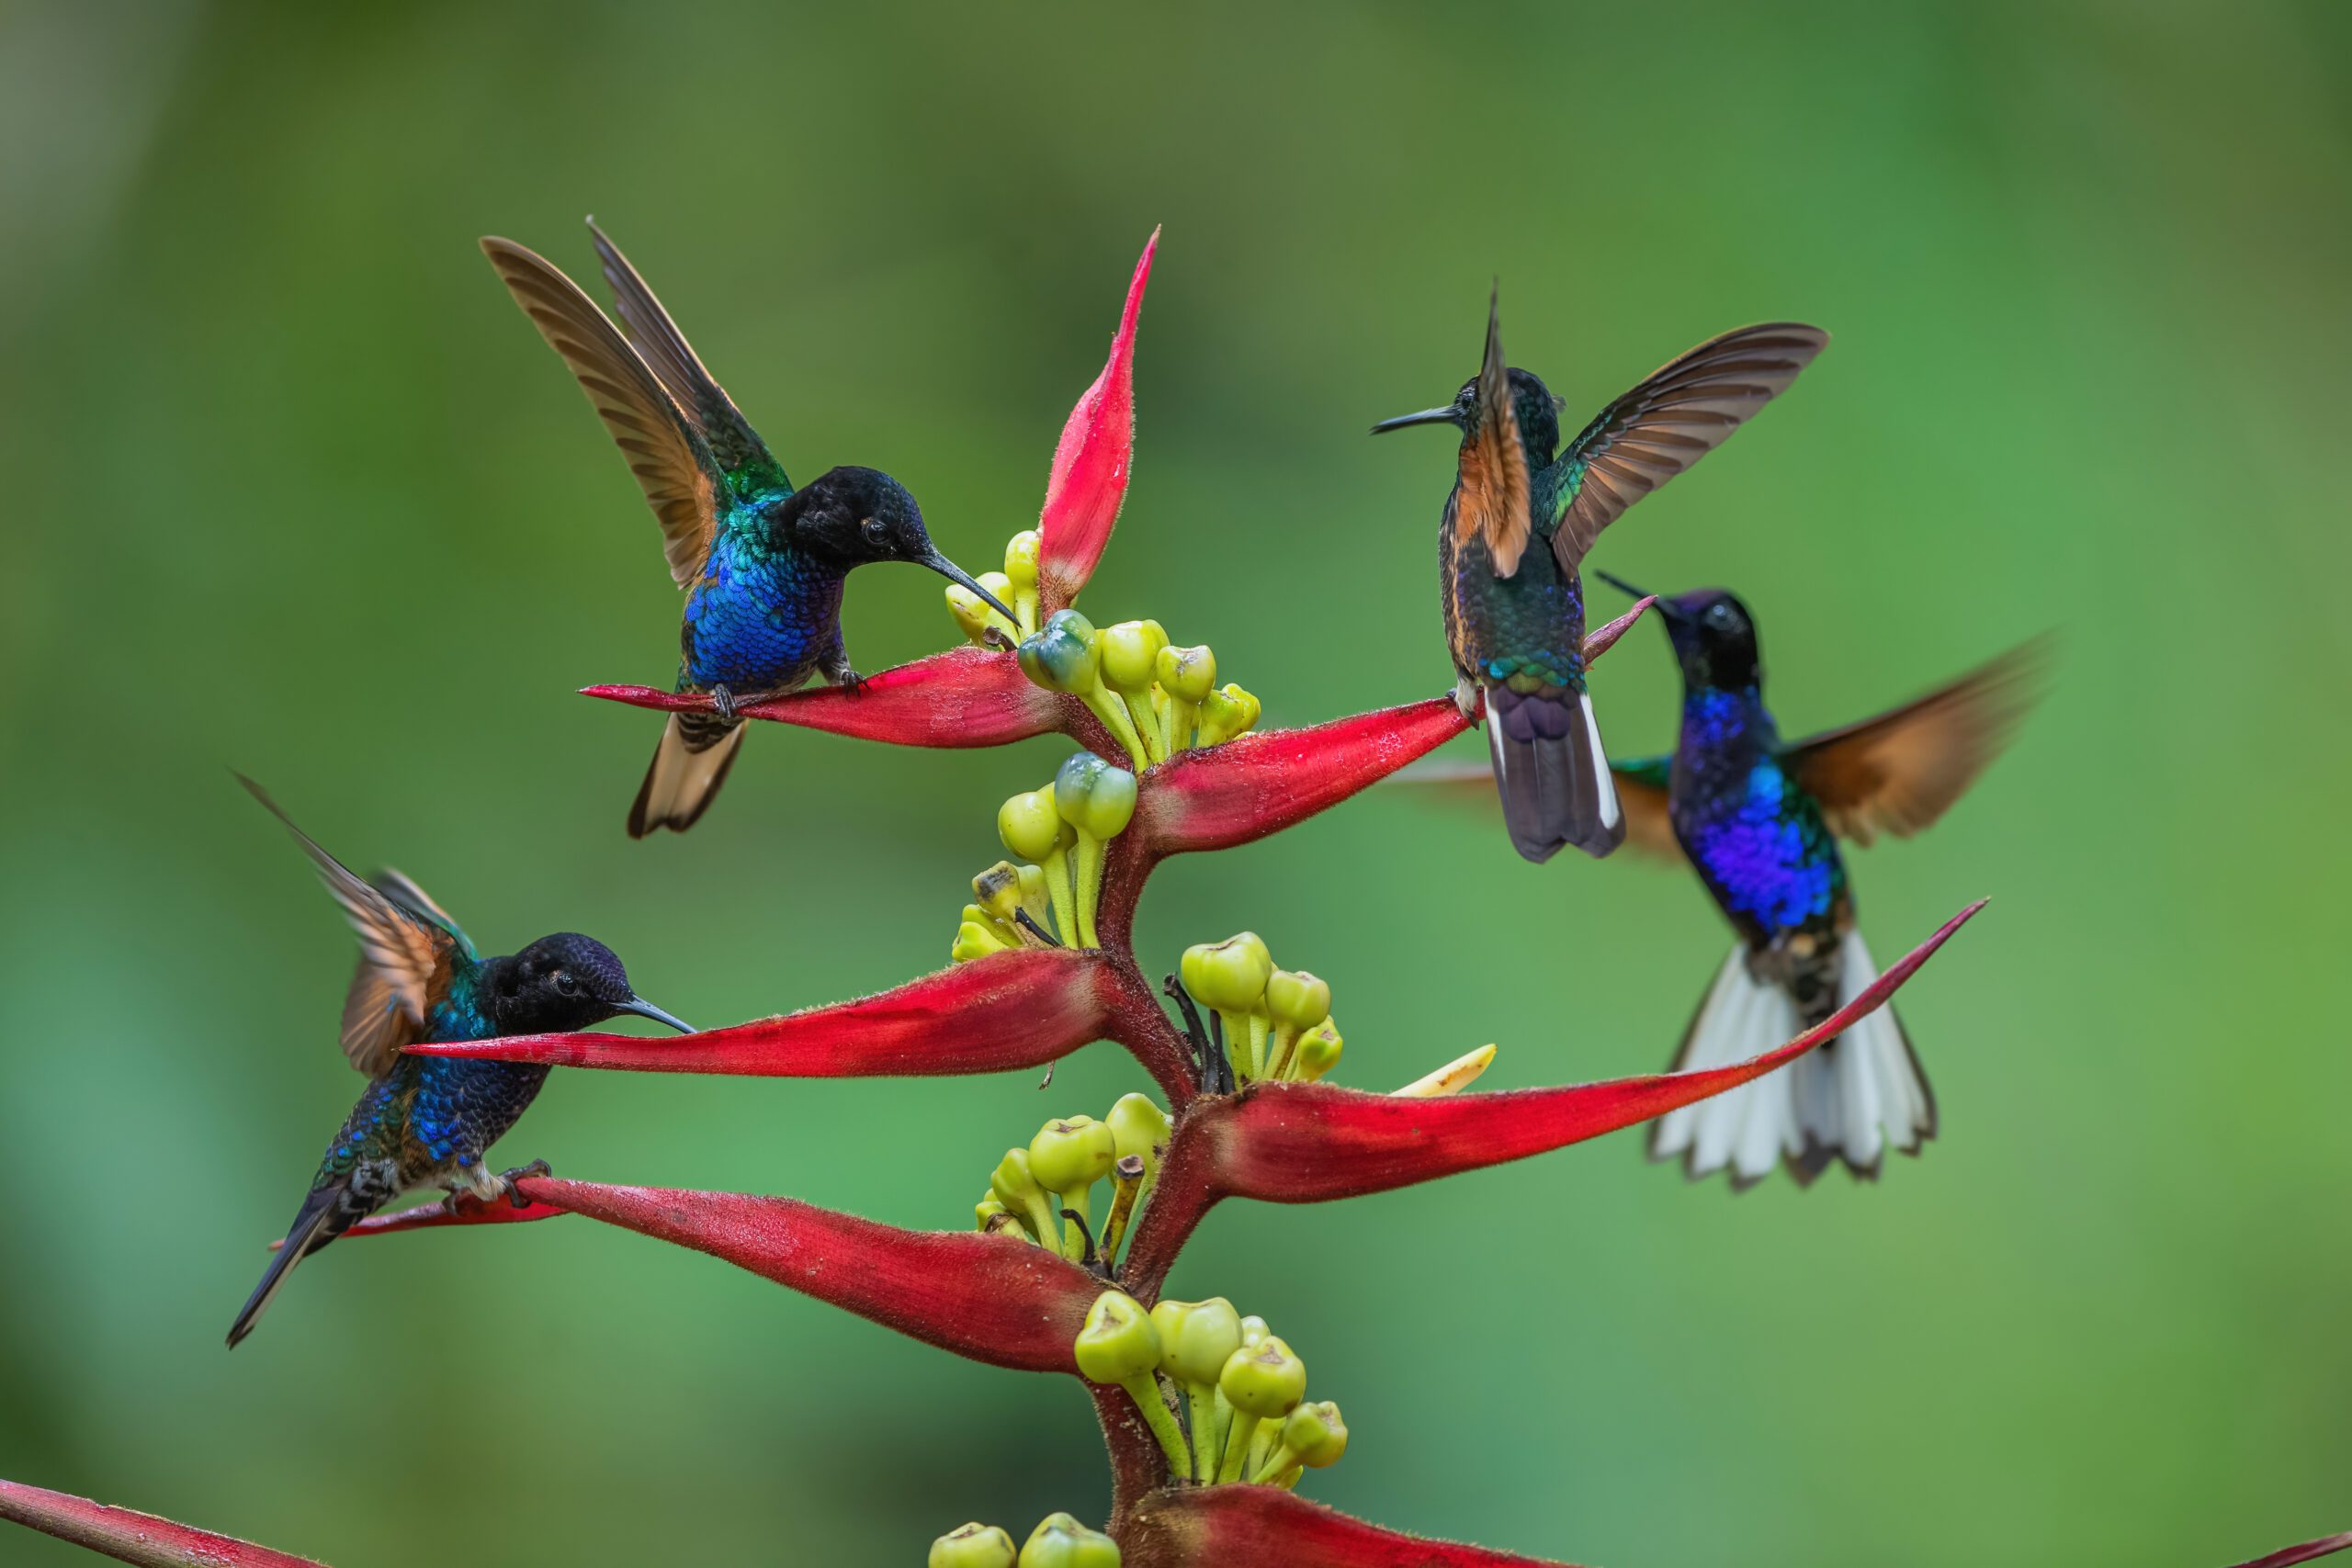 Four brilliant blue hummingbirds with black heads feed from a red and green plant.